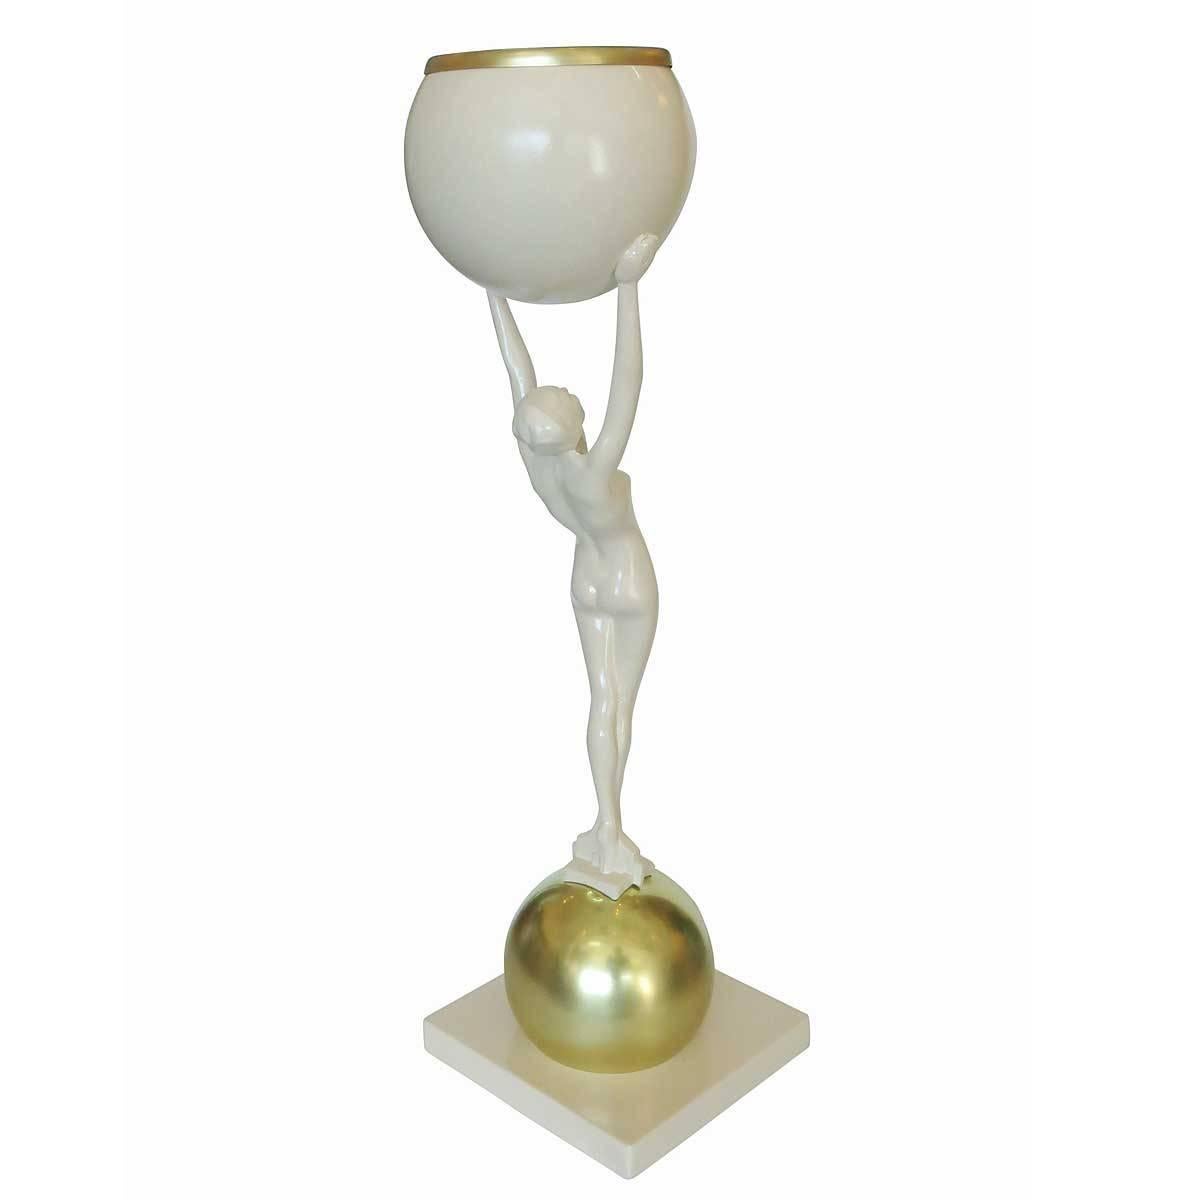 Art Deco Frankart Style Beige and Brass Nude Figural Cocktail Smoker